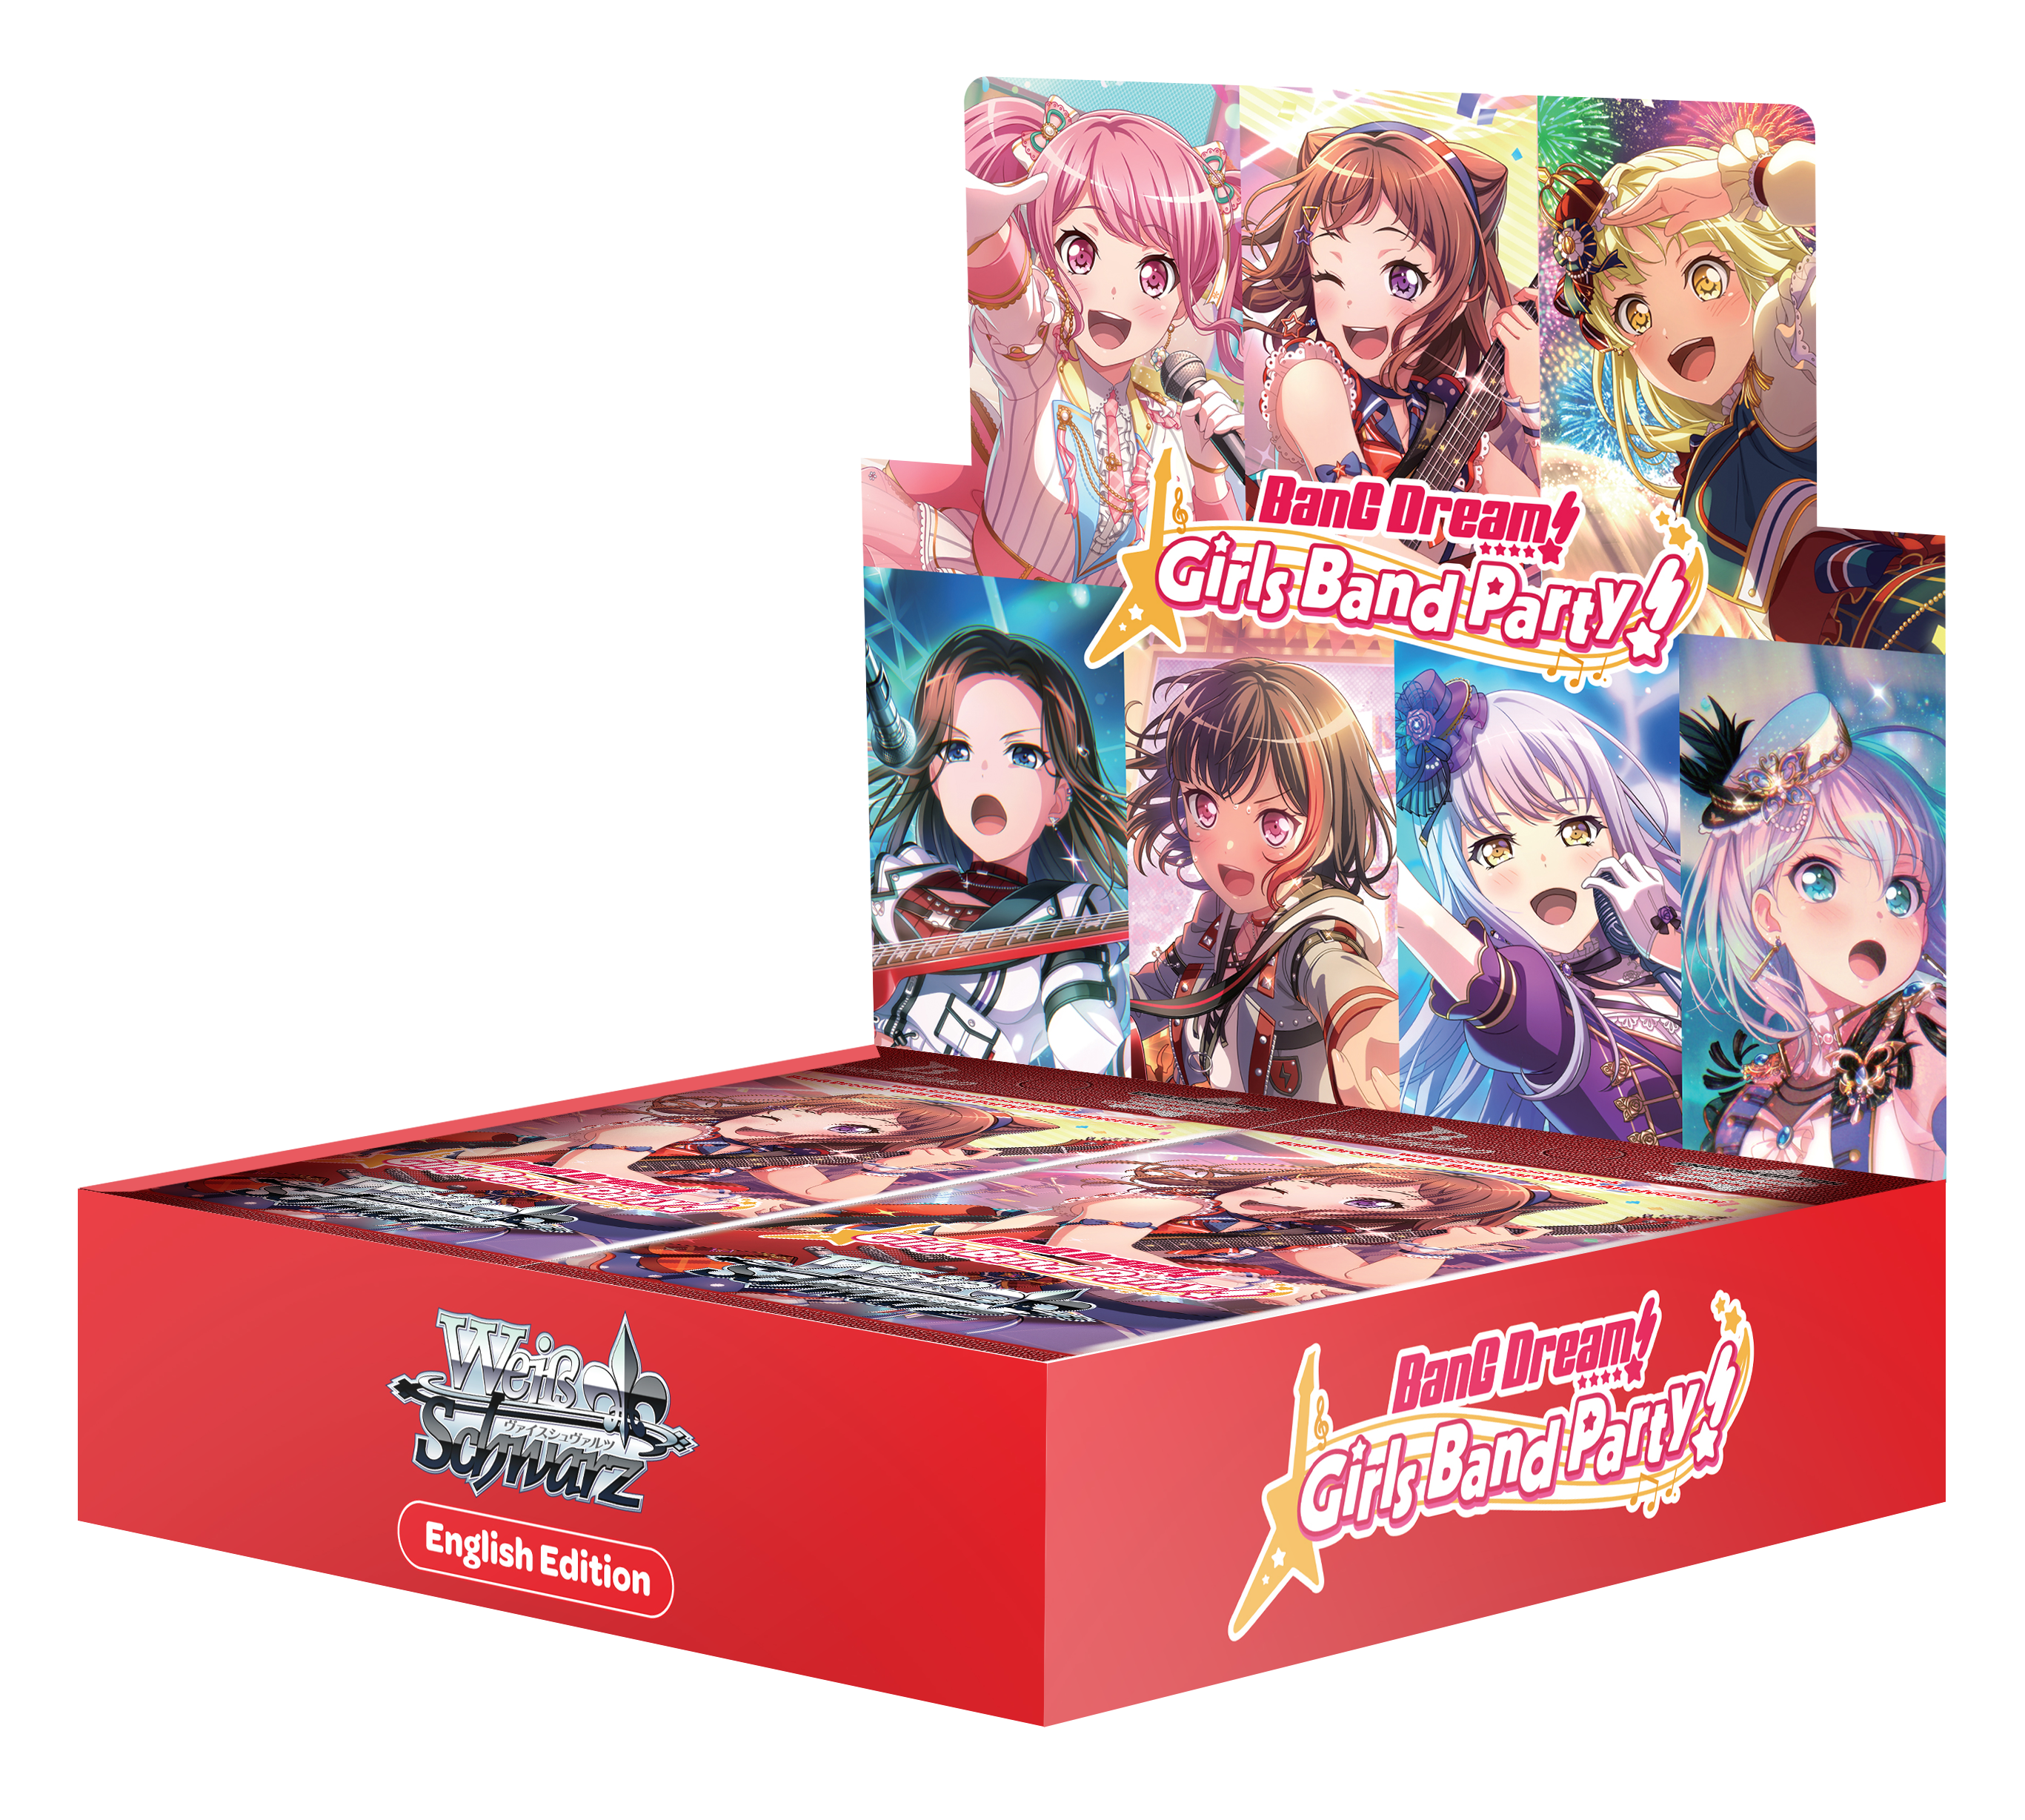 Weiss Schwarz - BanG Dream! Girls Band Party! 5th Anniversary - Booster Box (16 Packs)